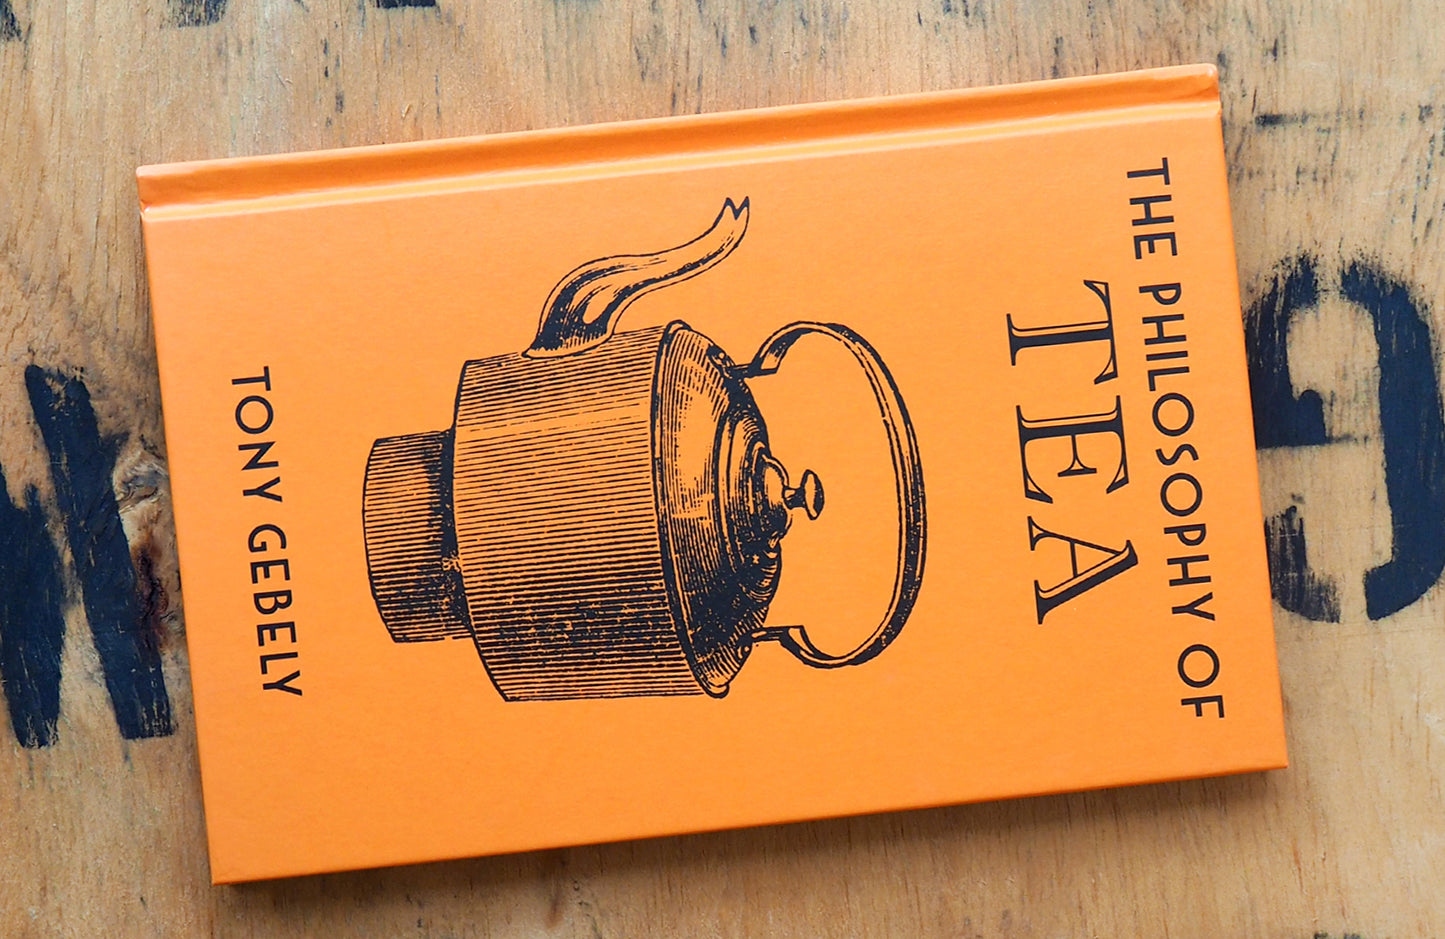 The Philosophy of Tea By Tony Gebely